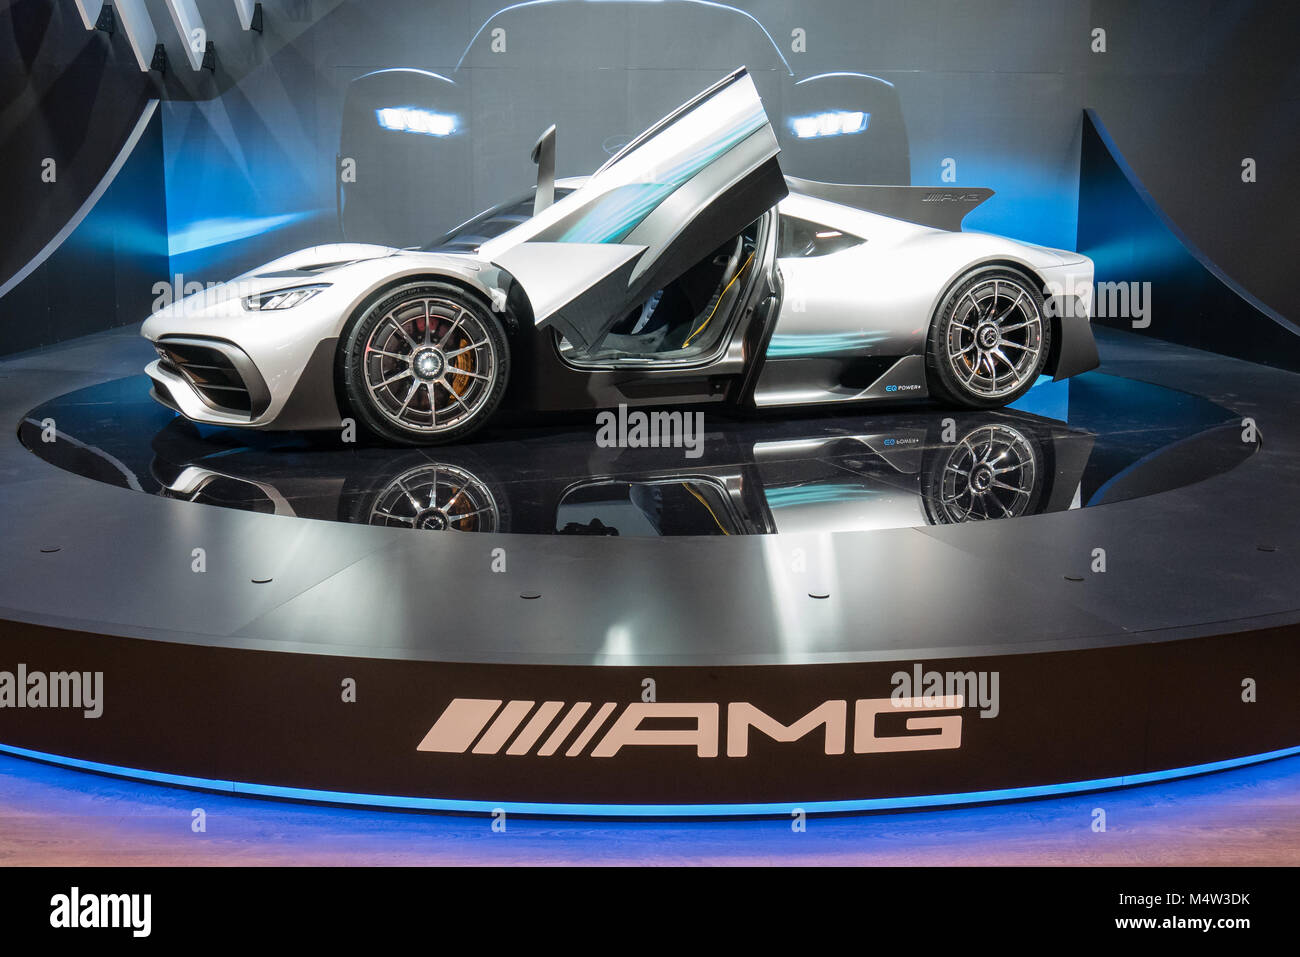 Mercedes Benz amg Project One r50 Concept Car Stockfotografie - Alamy